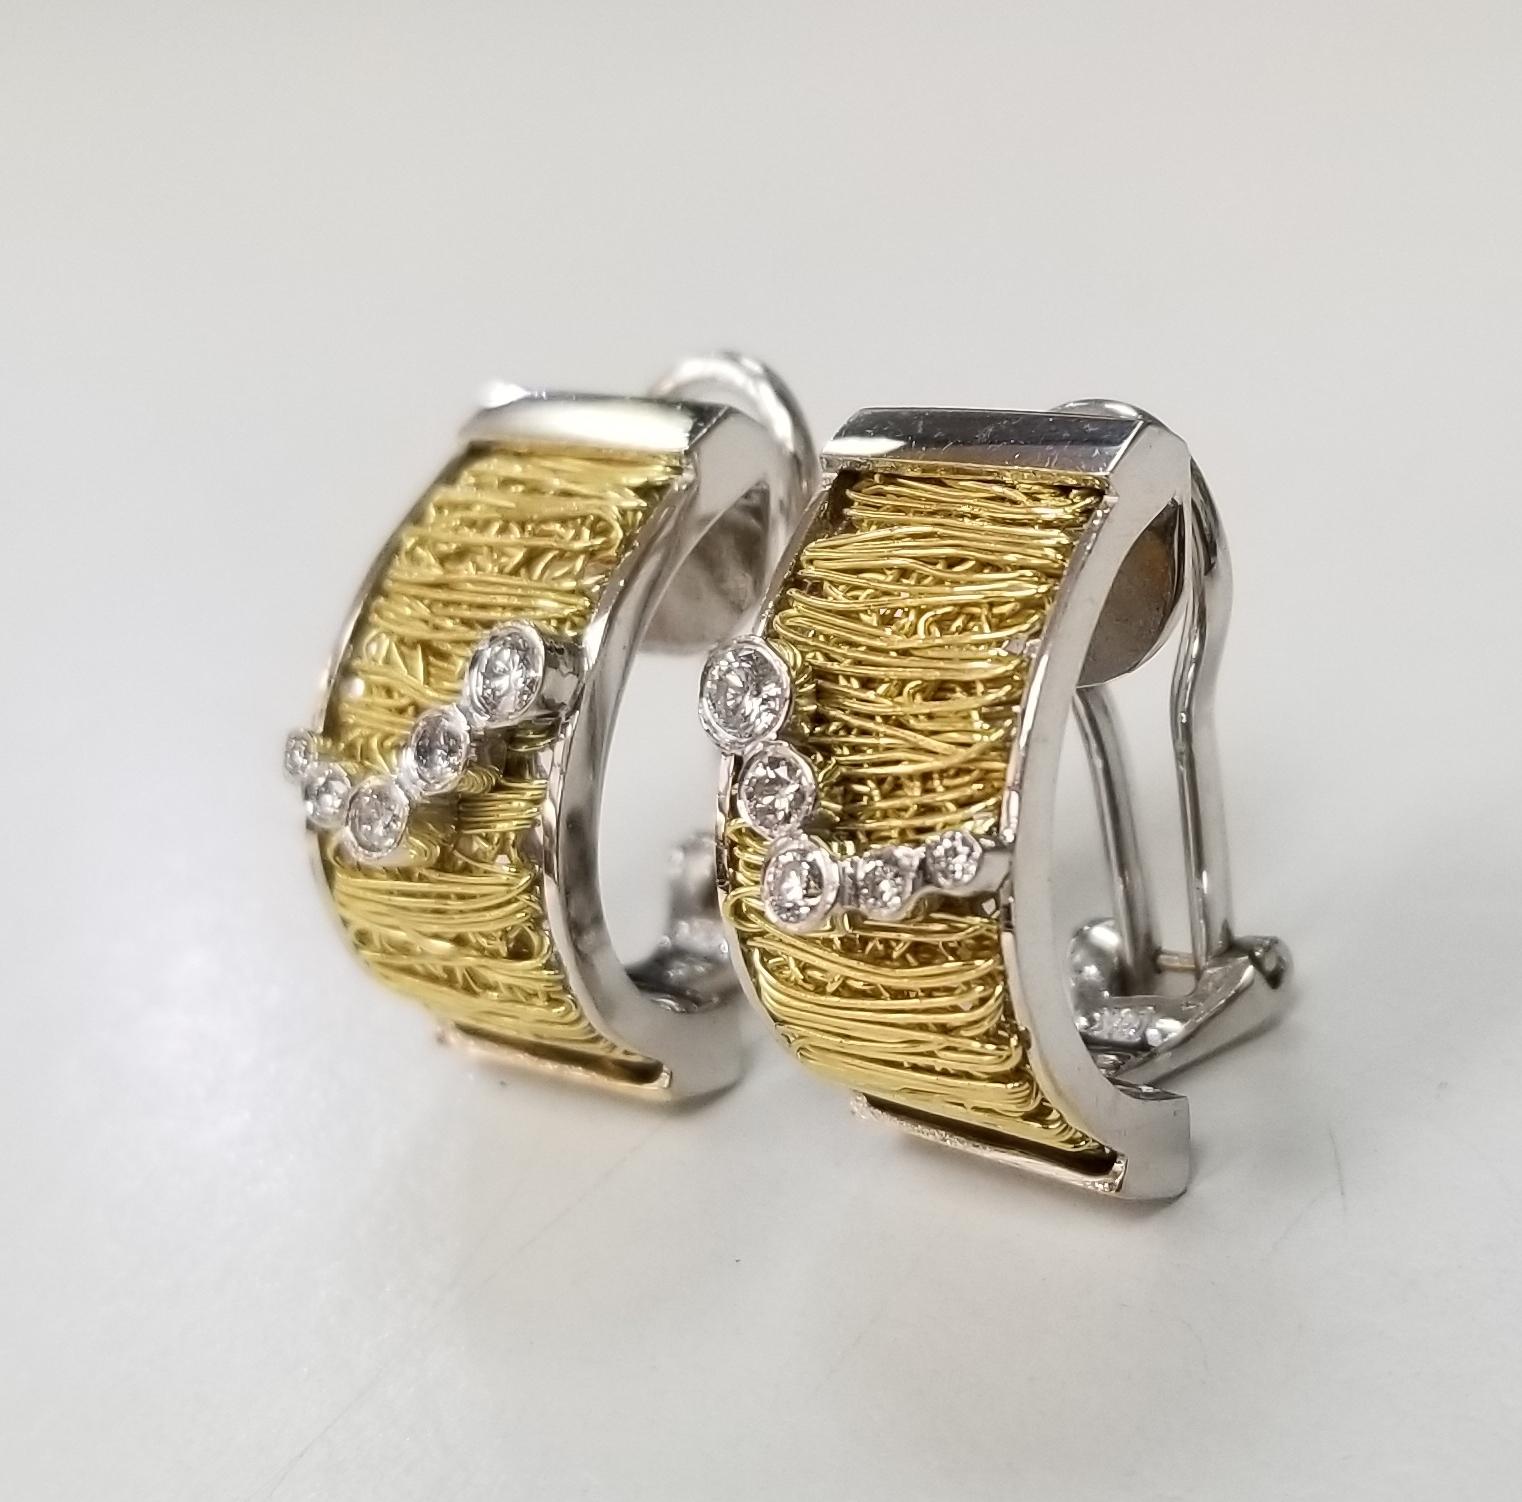 *Motivated to Sell – Please make a Fair Offer*
Pasquale Bruni 18k white and yellow gold wire diamond earrings with a right and left earring.
    
Specifications:
    main stone: ROUND CUT DIAMONDS
    diamonds: 10 PCS
    carat total weight: